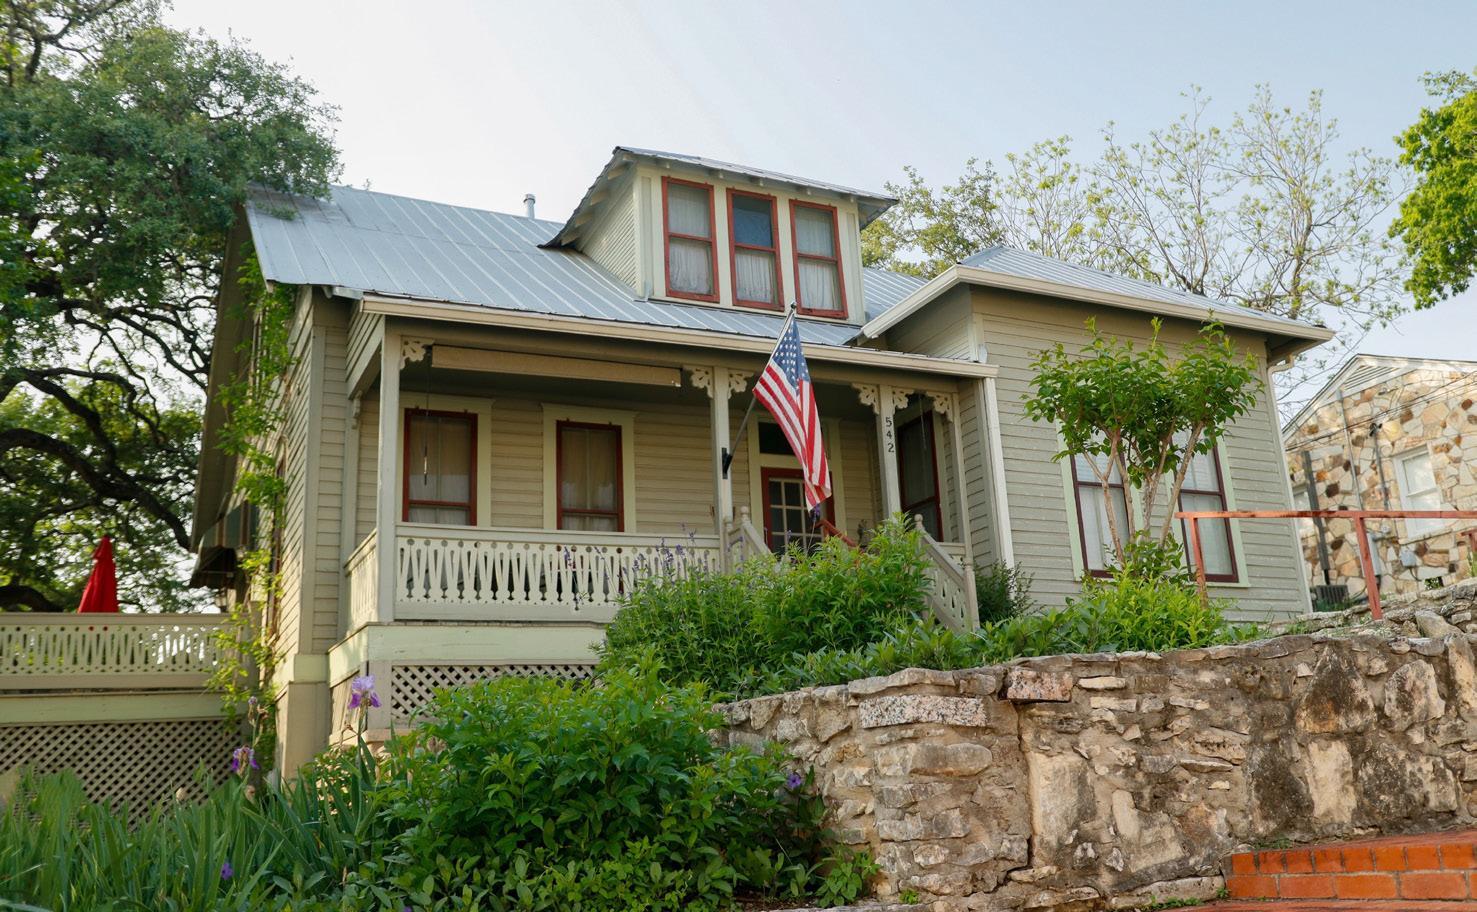 Burleson Street home shows craftsmanship after 115 years: The Joyce – Hansen home